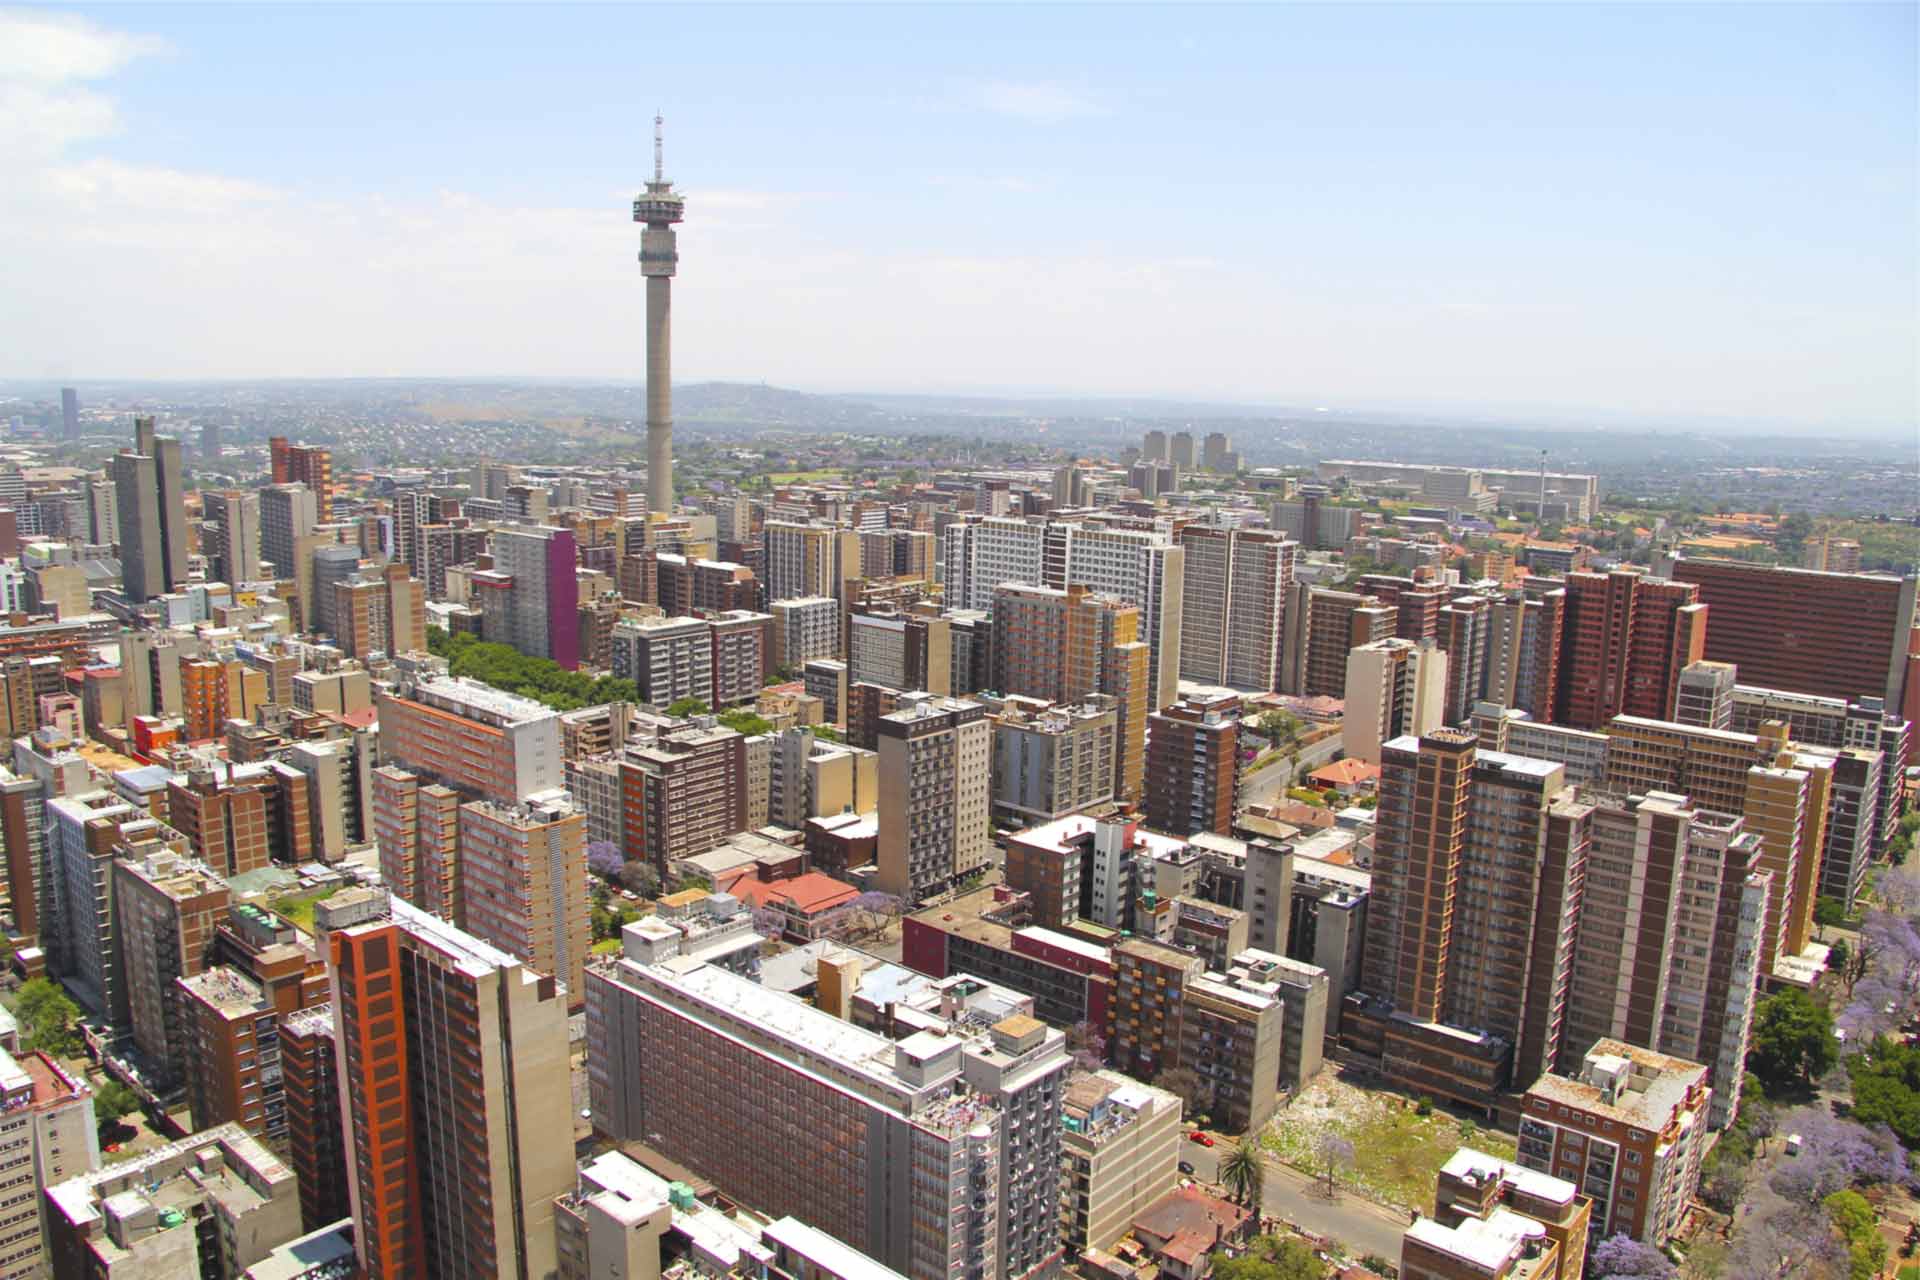 Johannesburg is the largest city in South Africa and is one of the 50 largest urban areas in the world. The economic powerhouse of Johannesburg generates 17 percent of the country’s gross domestic product, mostly through manufacturing, retail and service industry sectors.